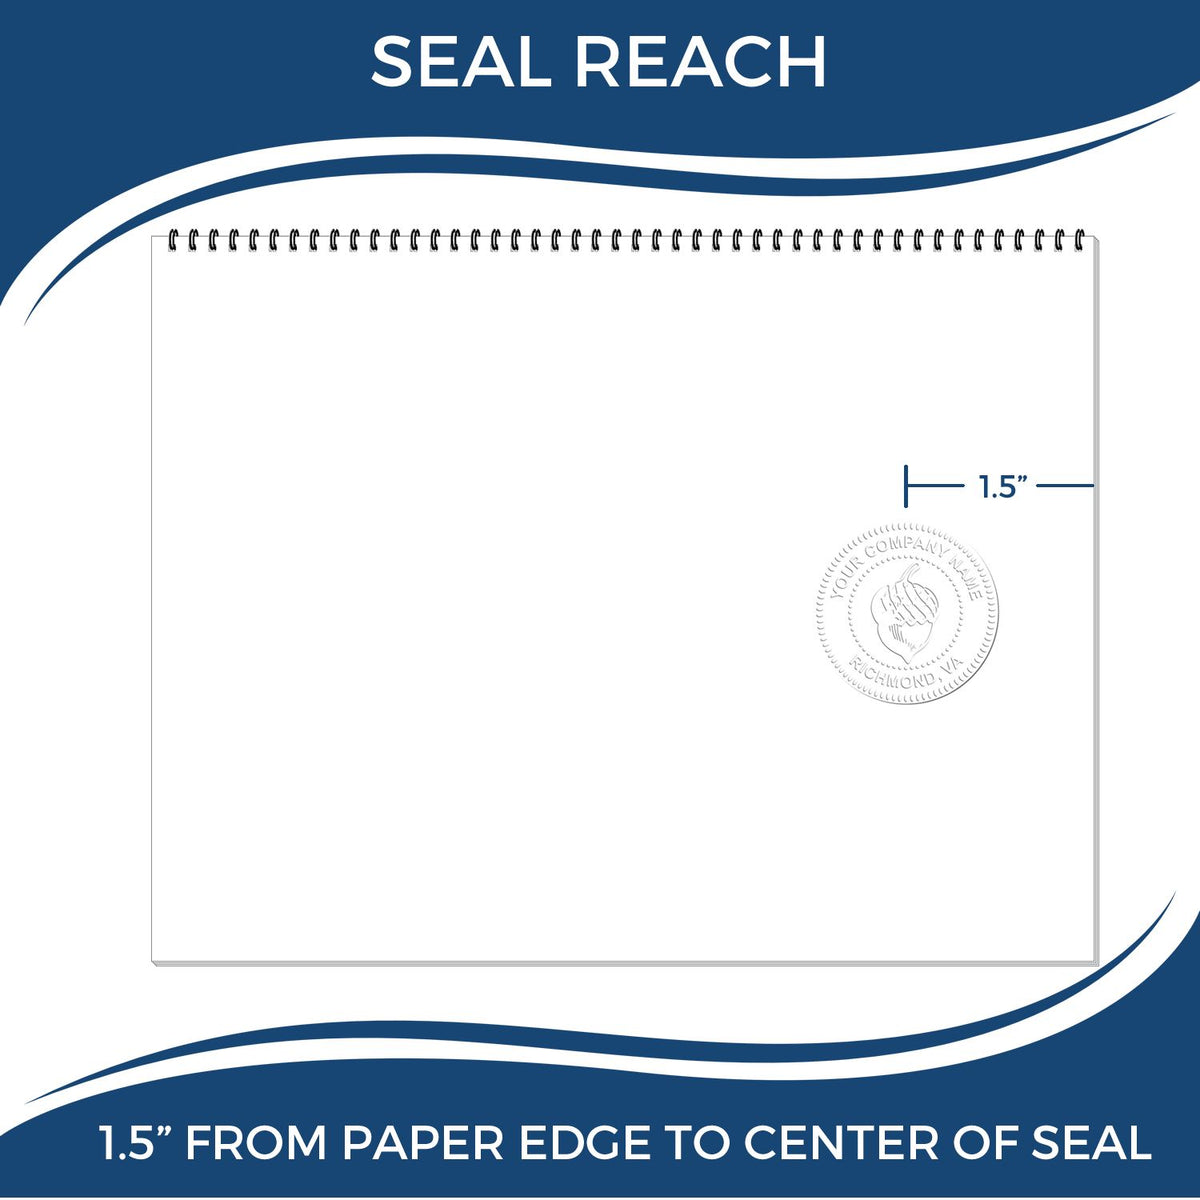 An infographic showing the seal reach which is represented by a ruler and a miniature seal image of the Soft Iowa Professional Geologist Seal